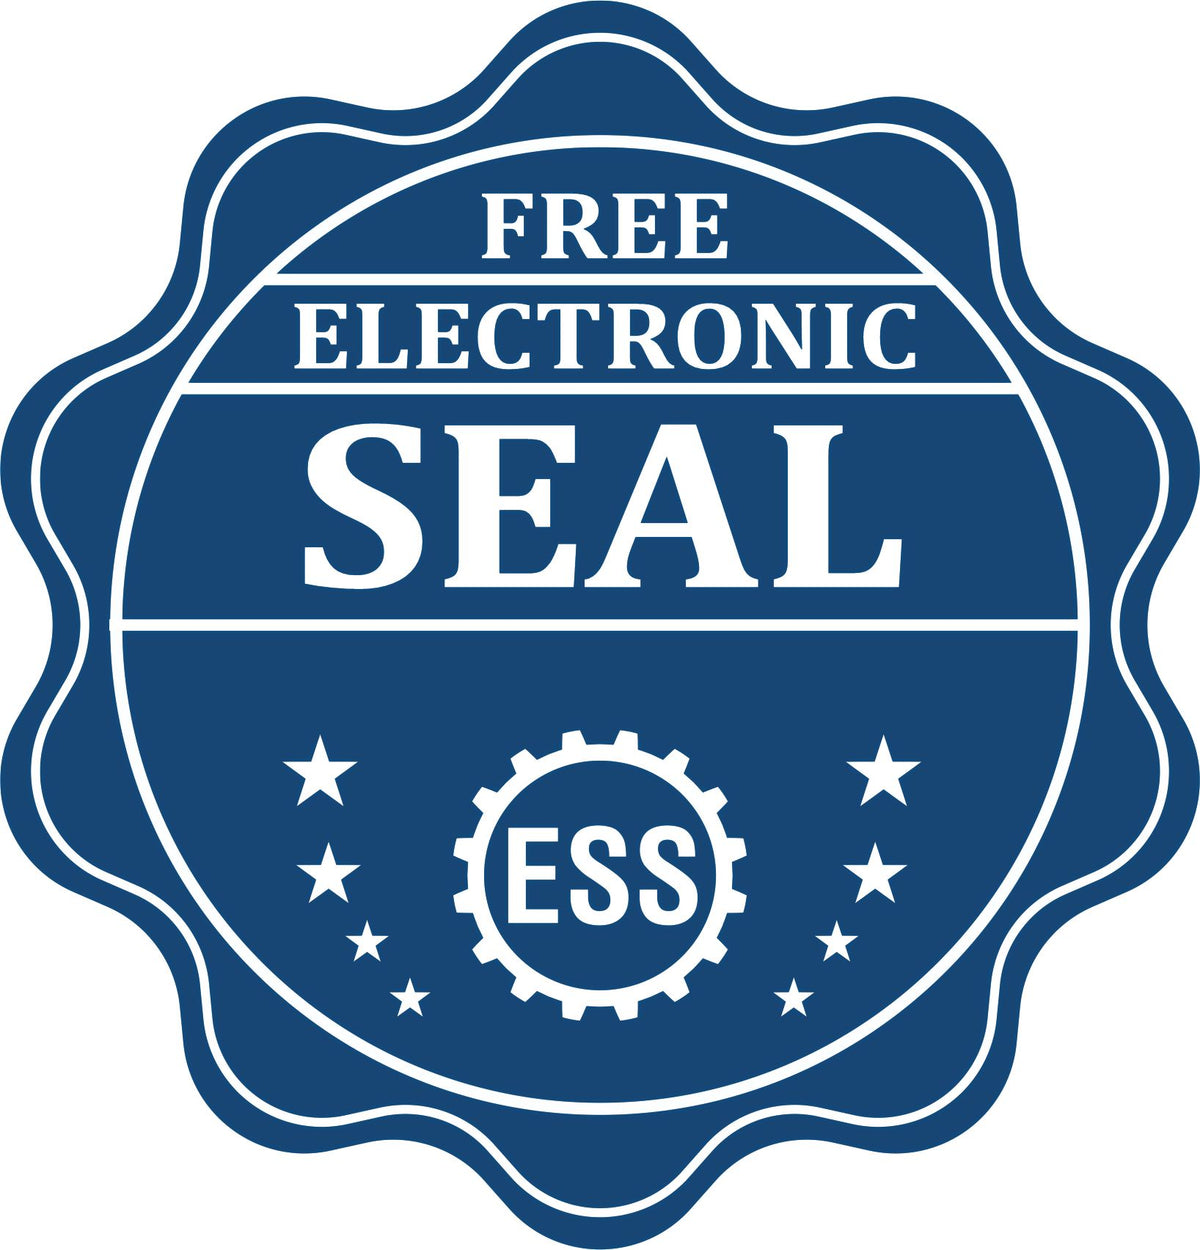 A badge showing a free electronic seal for the Slim Pre-Inked West Virginia Land Surveyor Seal Stamp with stars and the ESS gear on the emblem.